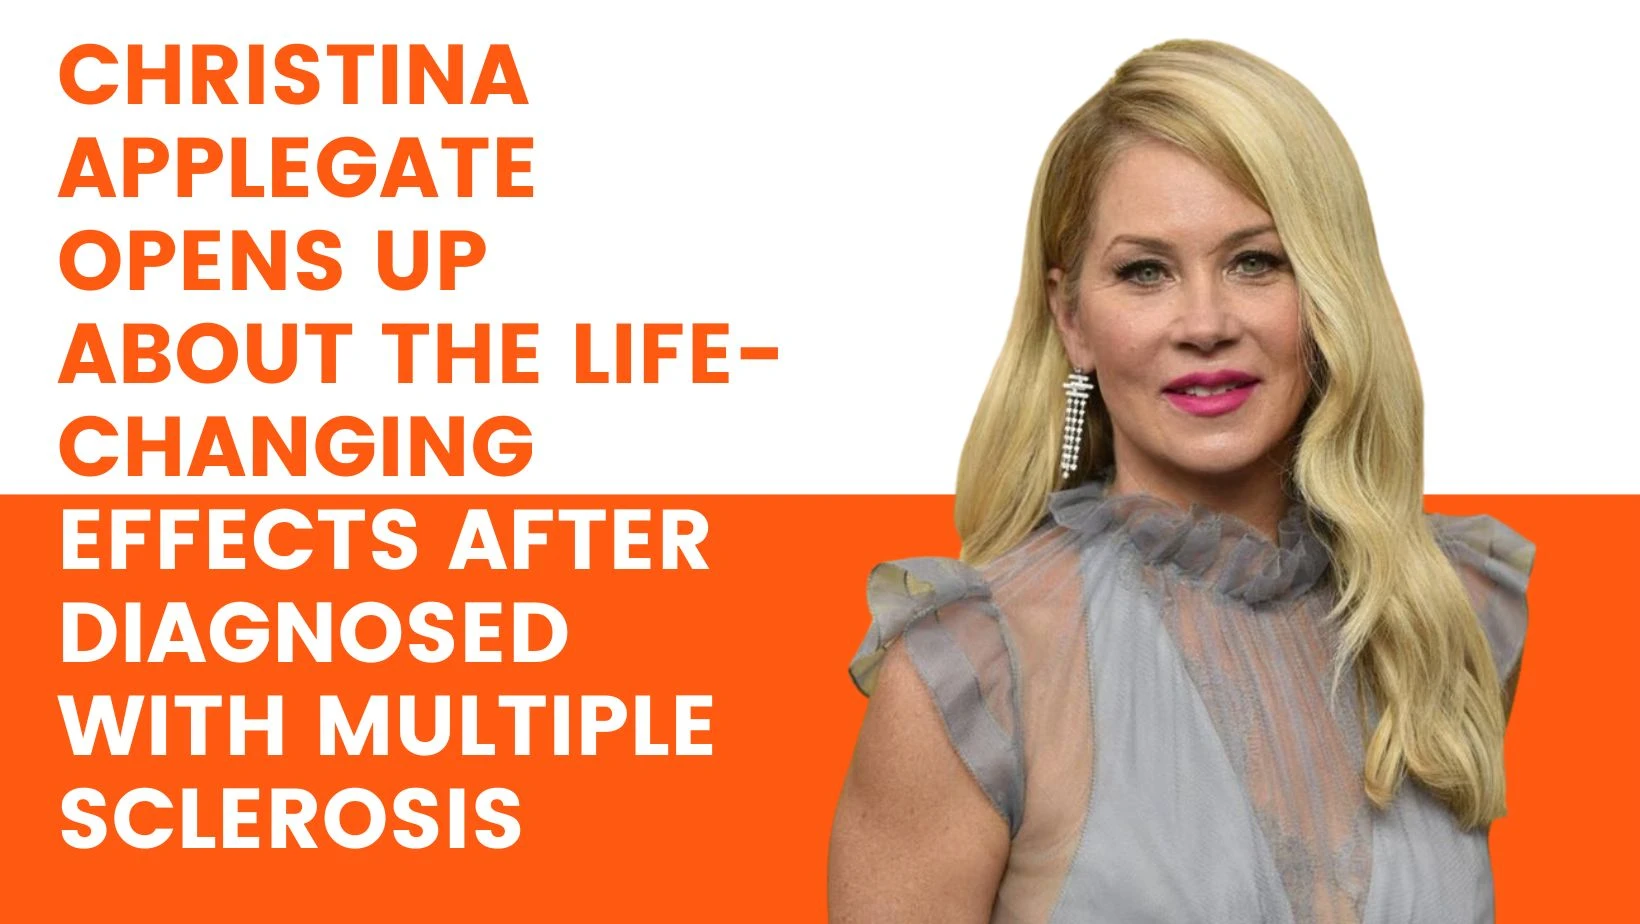 Christina Applegate opens up about the life-changing effects after diagnosed with multiple sclerosis